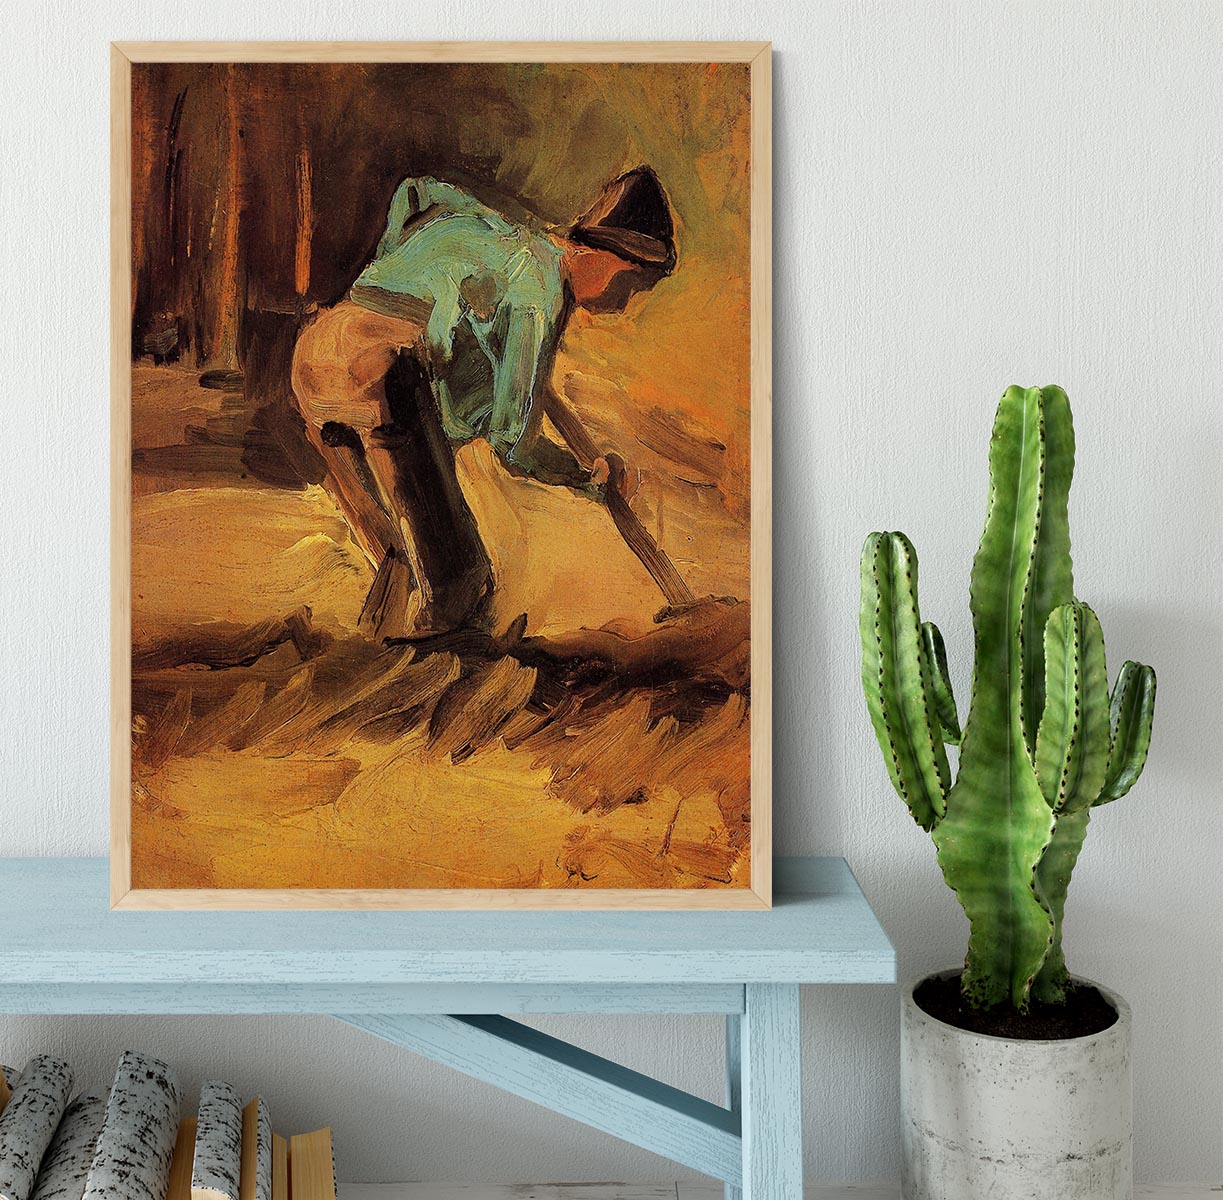 Man Stooping with Stick or Spade by Van Gogh Framed Print - Canvas Art Rocks - 4